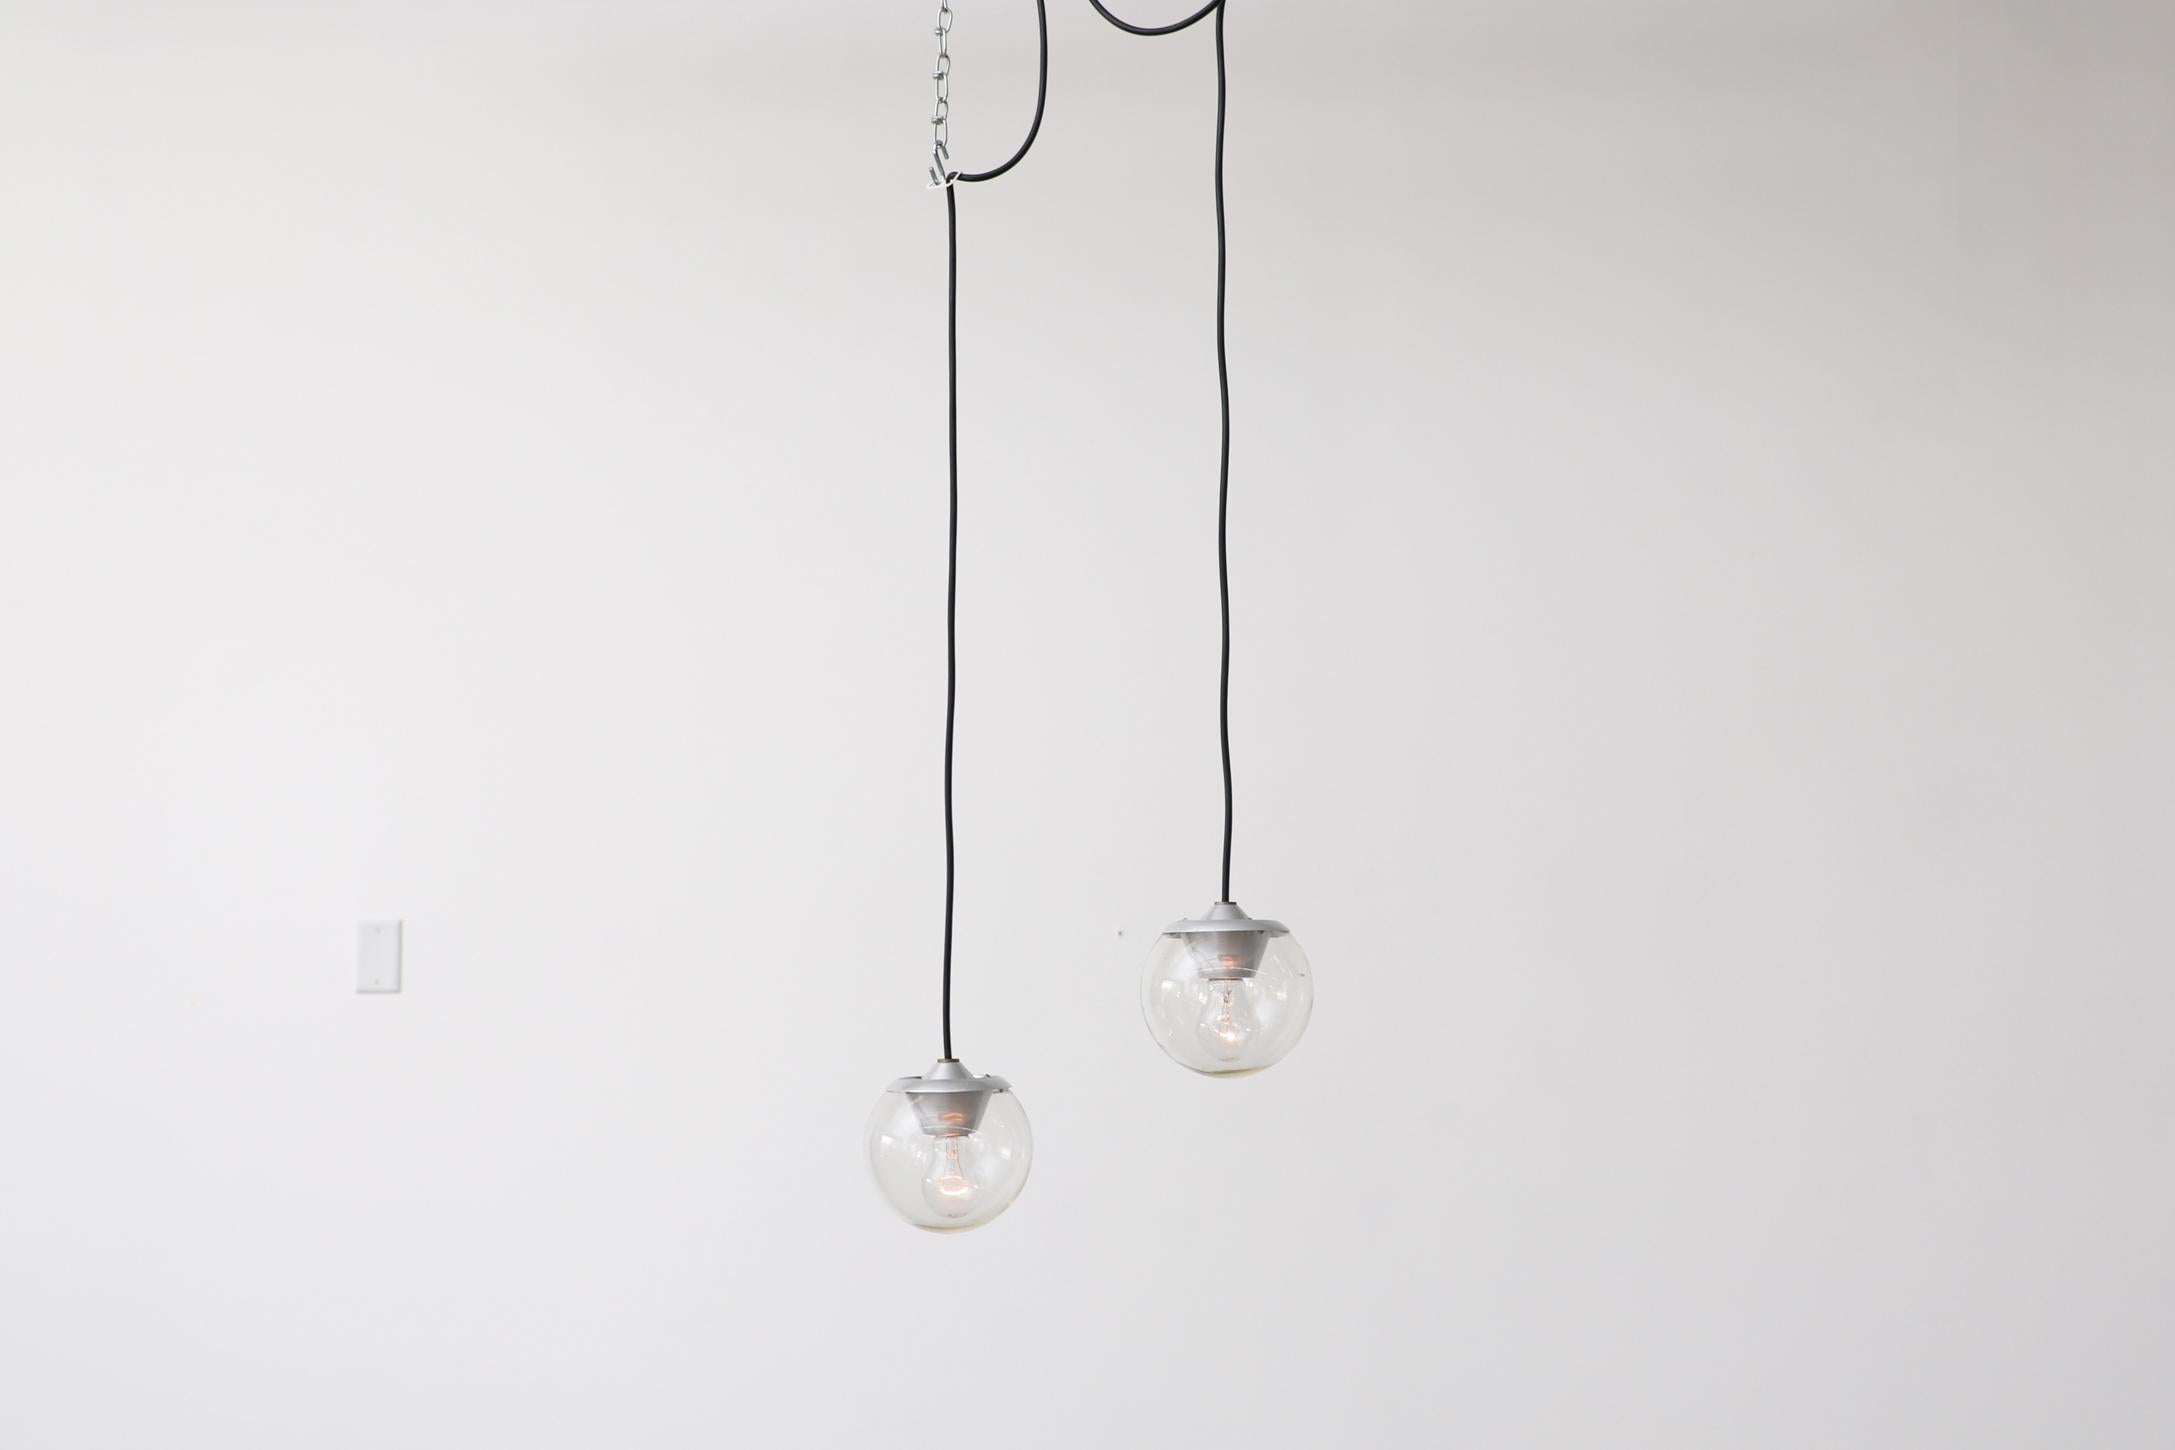 Pair of Gino Sarfatti Pendants Model 2095/1 by Arteluce, Italy, 1958. Blown glass pendant lights with clear glass globe shades, aluminum hardware and long cords. These pendants do not have canopies. In original condition with visible wear,